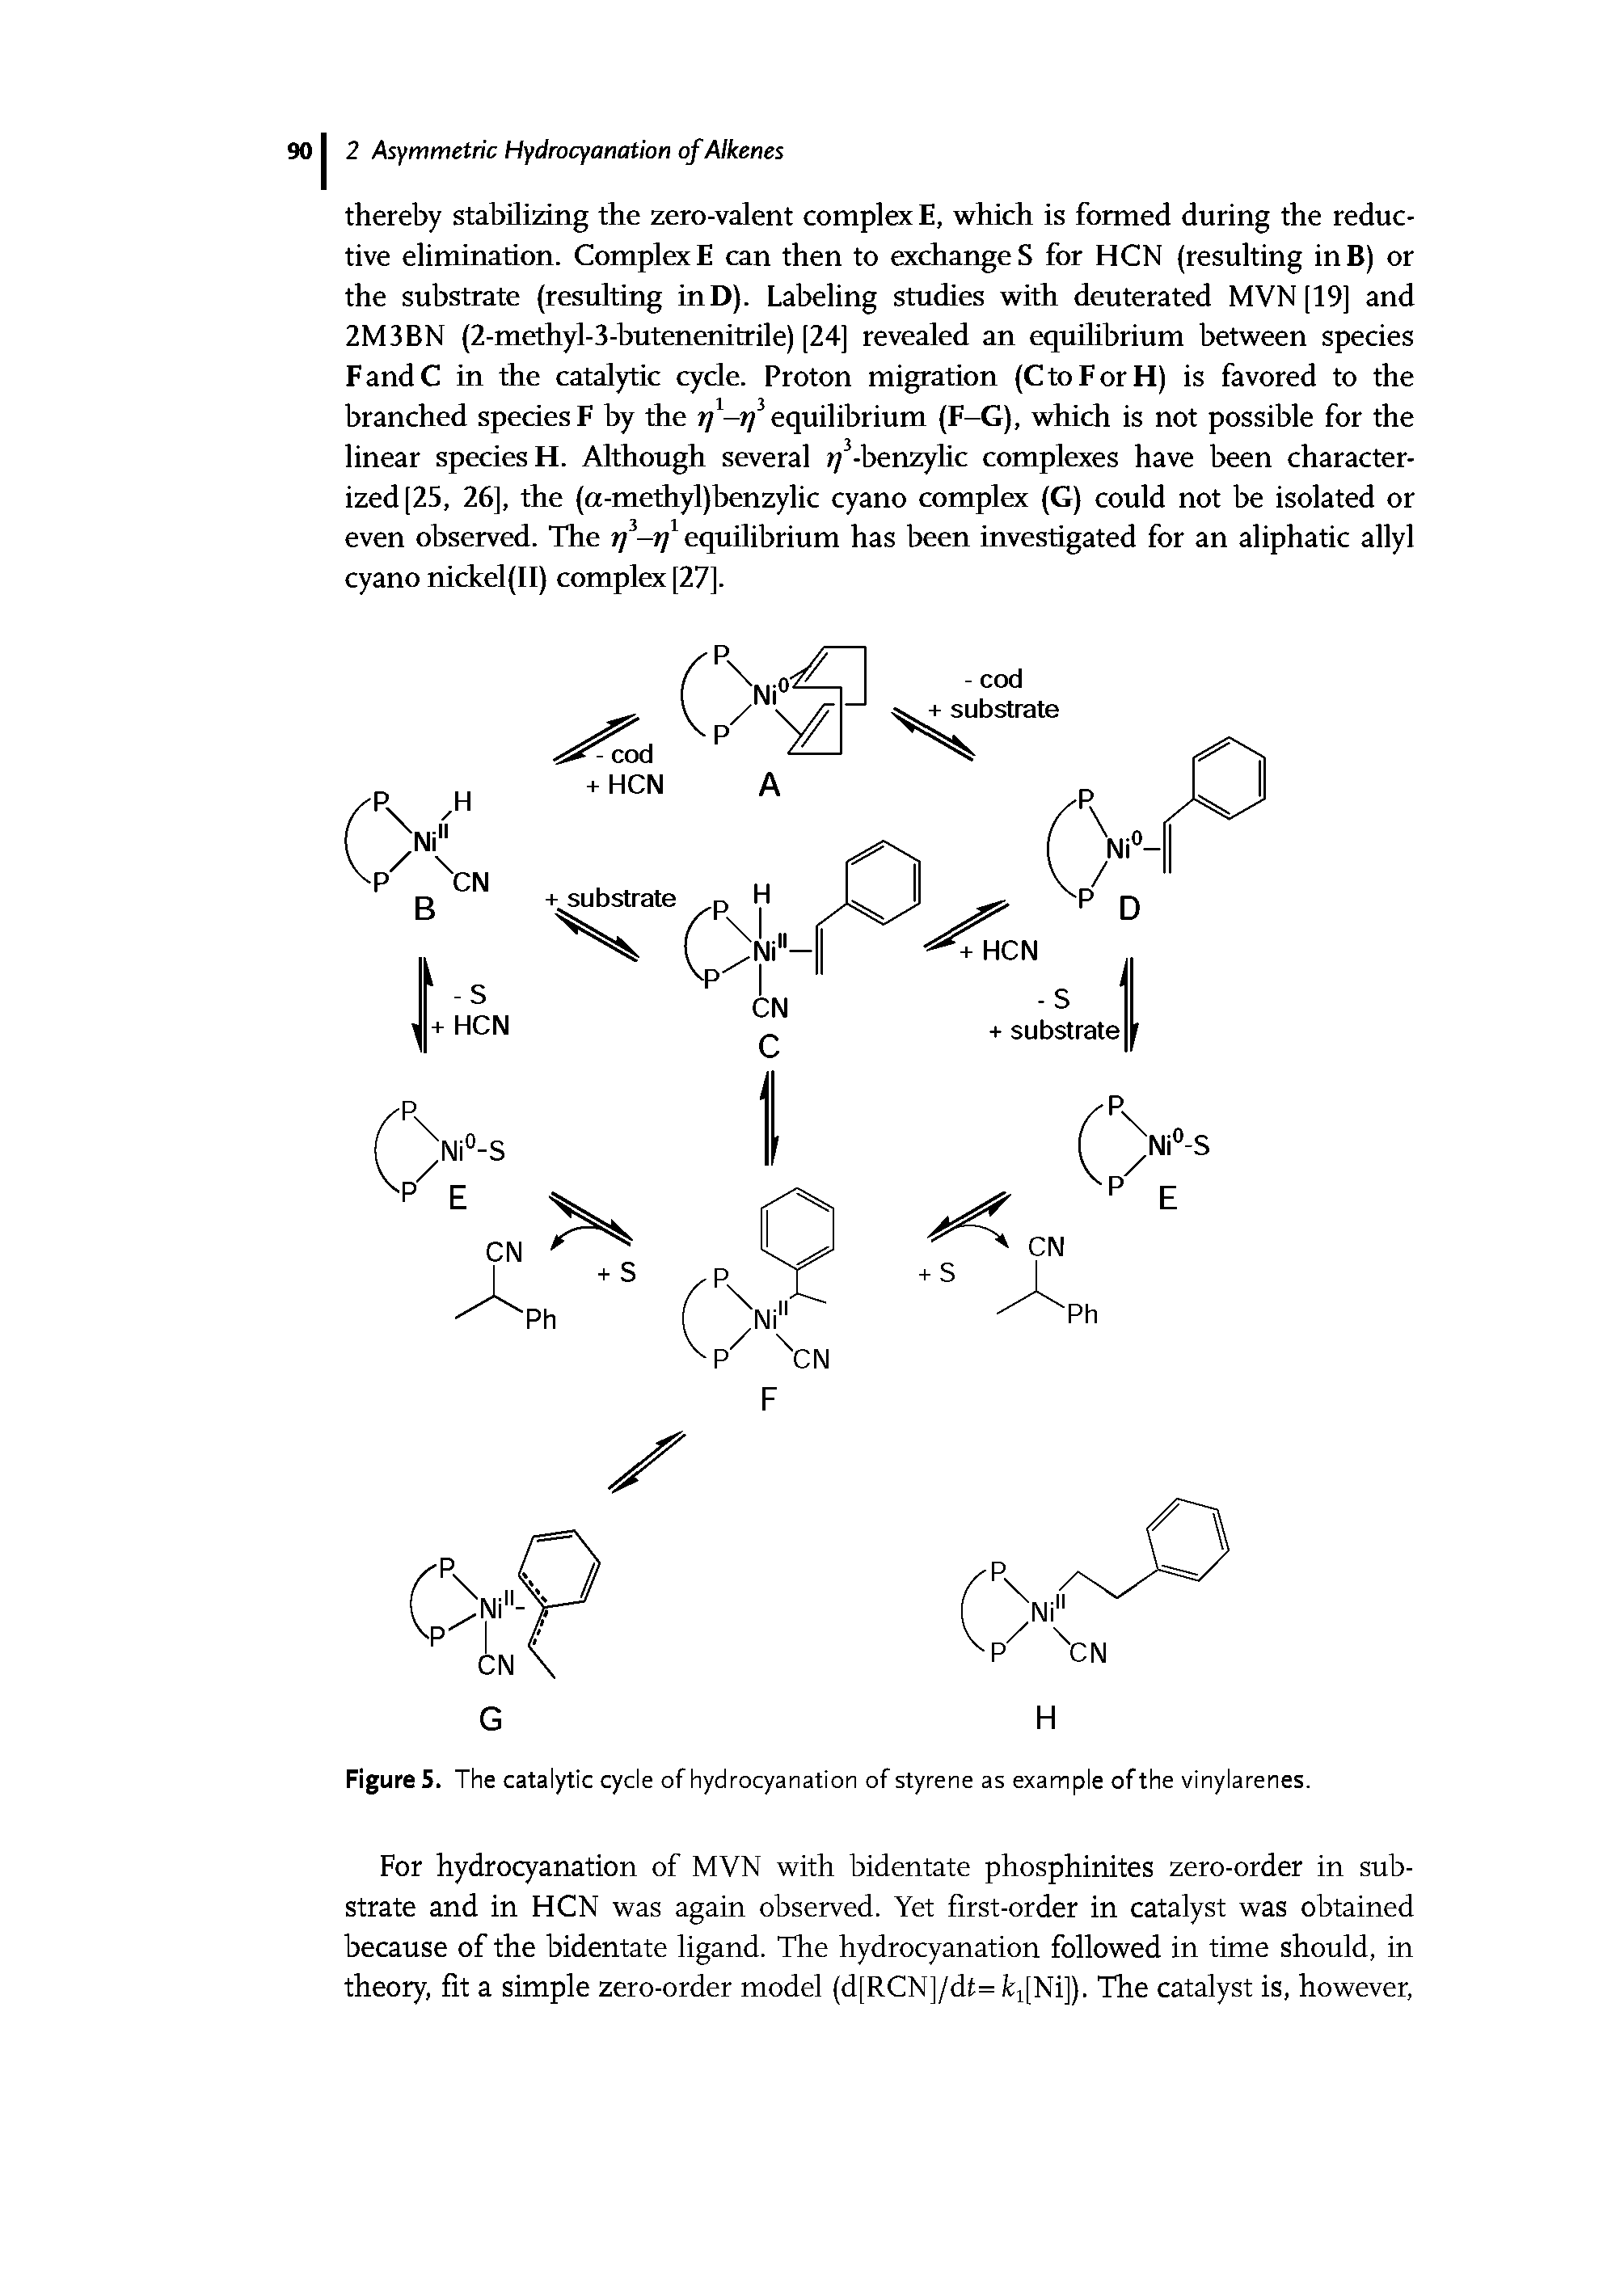 Figure 5. The catalytic cycle of hydrocyanation of styrene as example of the vinylarenes.